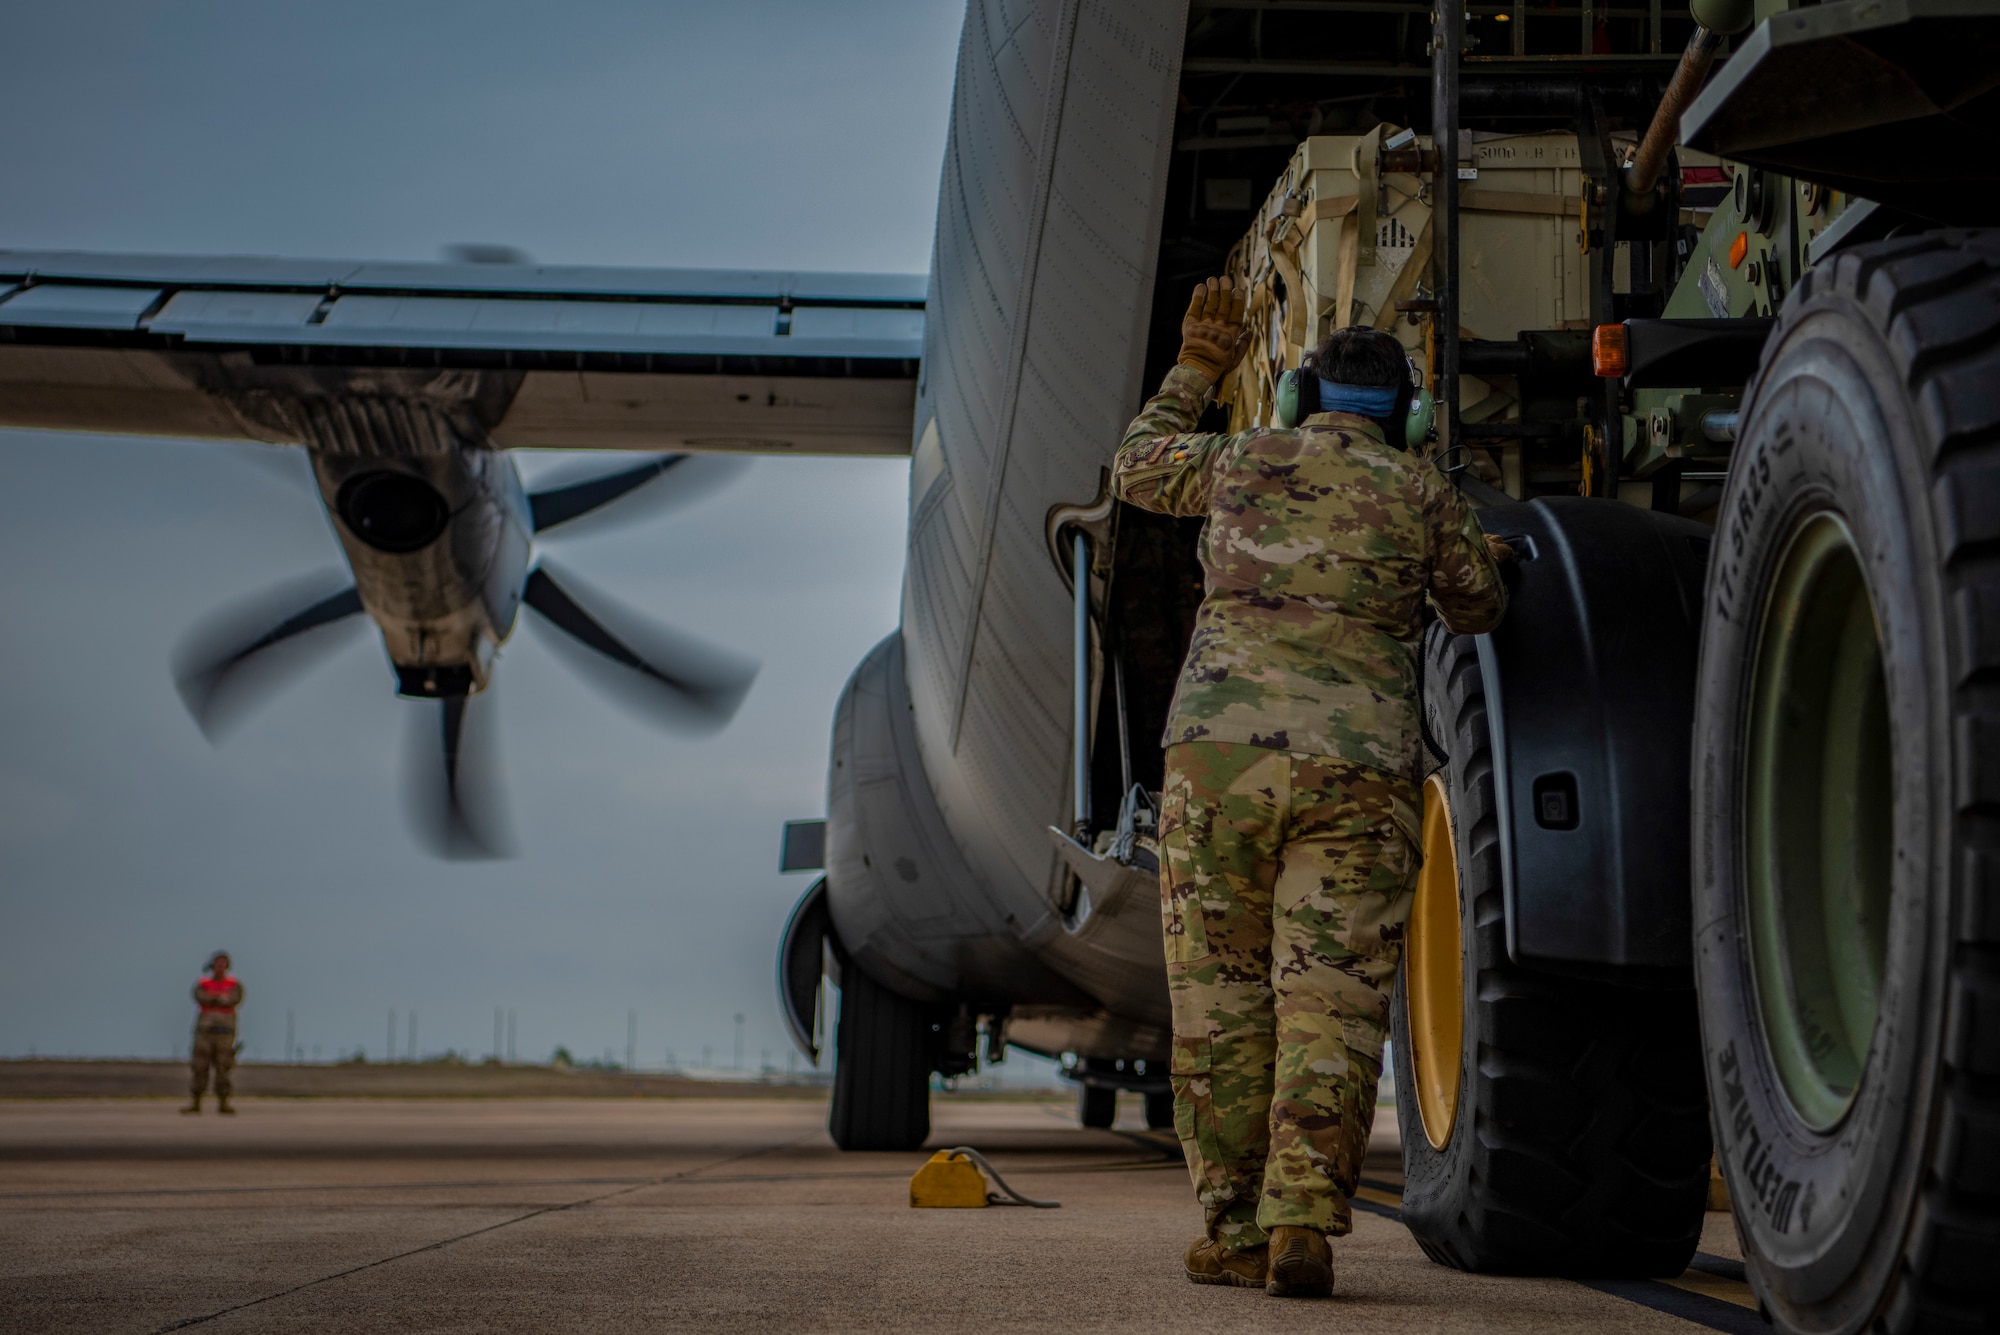 Tech. Sgt. Dani Galich, 40th Airlift Squadron tactics flight chief, loads the back of a C-130J Super Hercules during exercise Patriot Fury at Robert Gray Army Airfield, Fort Hood, Texas, Aug. 30, 2022. Patriot Fury ensured the production of more experienced aircrews while proactively increasing the survivability of personnel and Air Force assets while generating tactical airlift power and deterrence. (U.S. Air Force photo by Airman 1st Class Ryan Hayman)